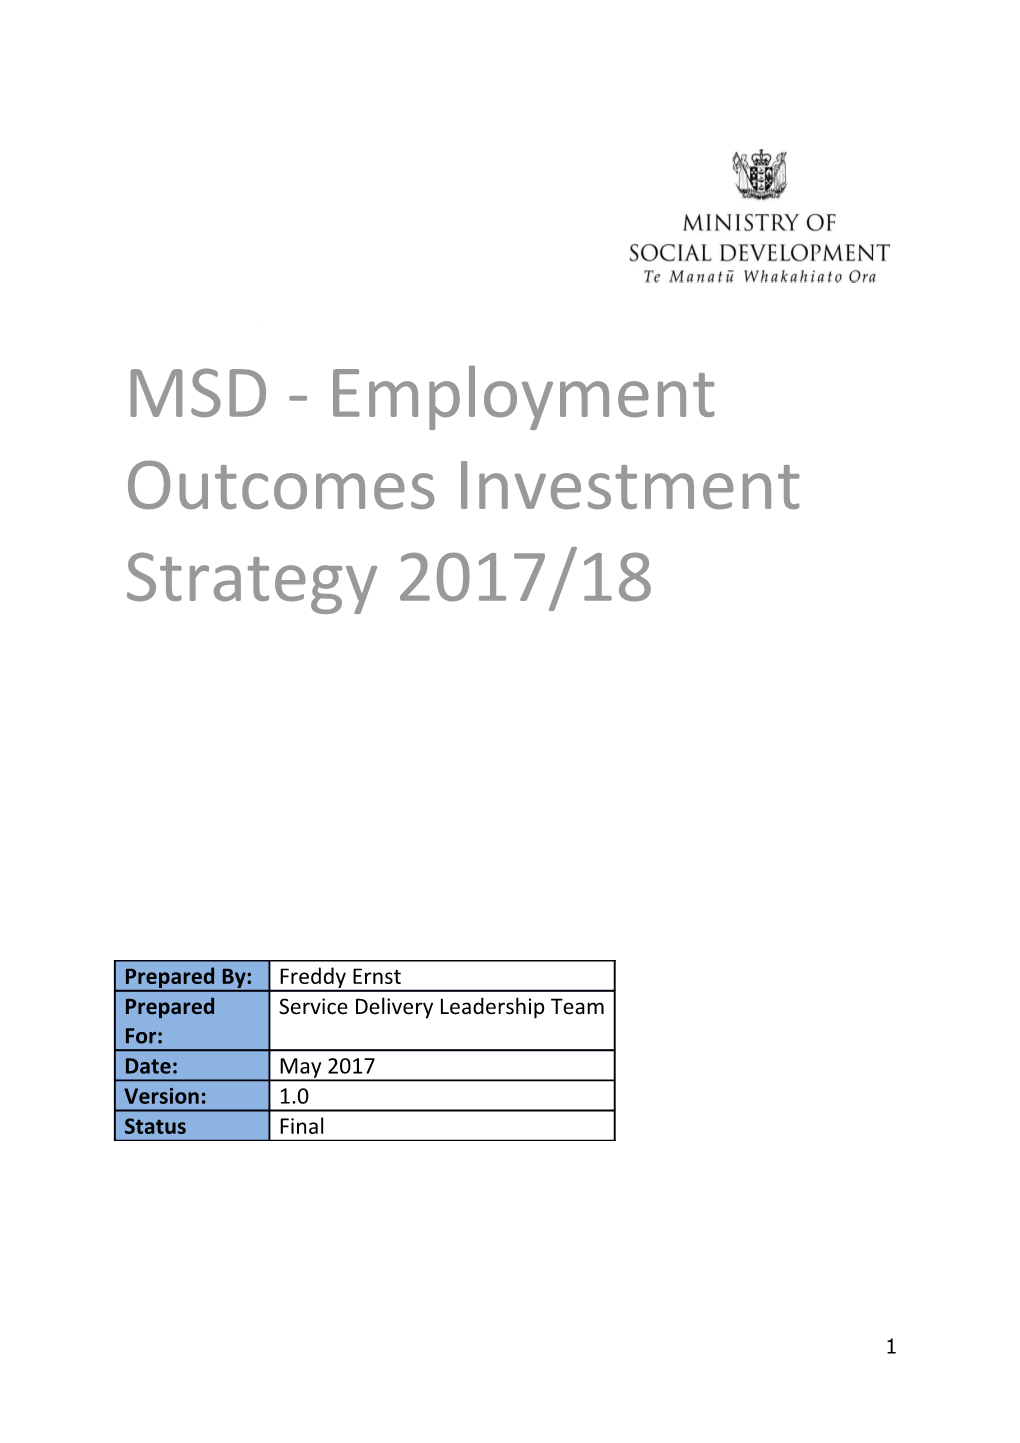 Ministry of Social Develoment - Employment Outcomes Investment Strategy 2017/18